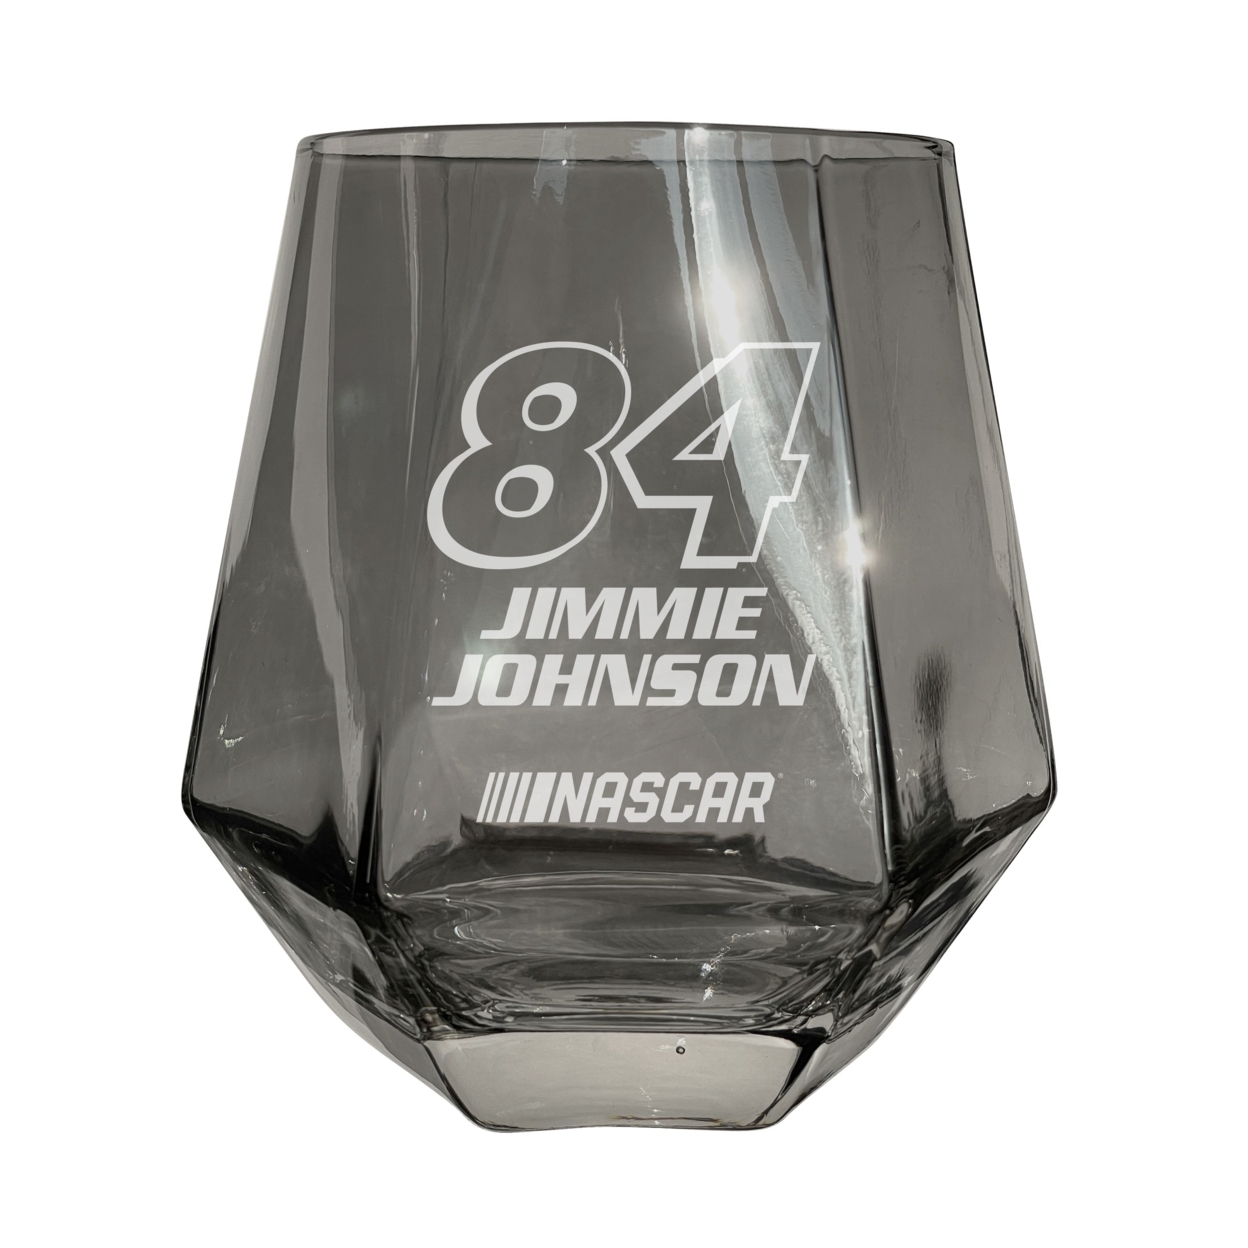 #84 Jimmie Johnson Officially Licensed 10 Oz Engraved Diamond Wine Glass - Iridescent, 2-Pack